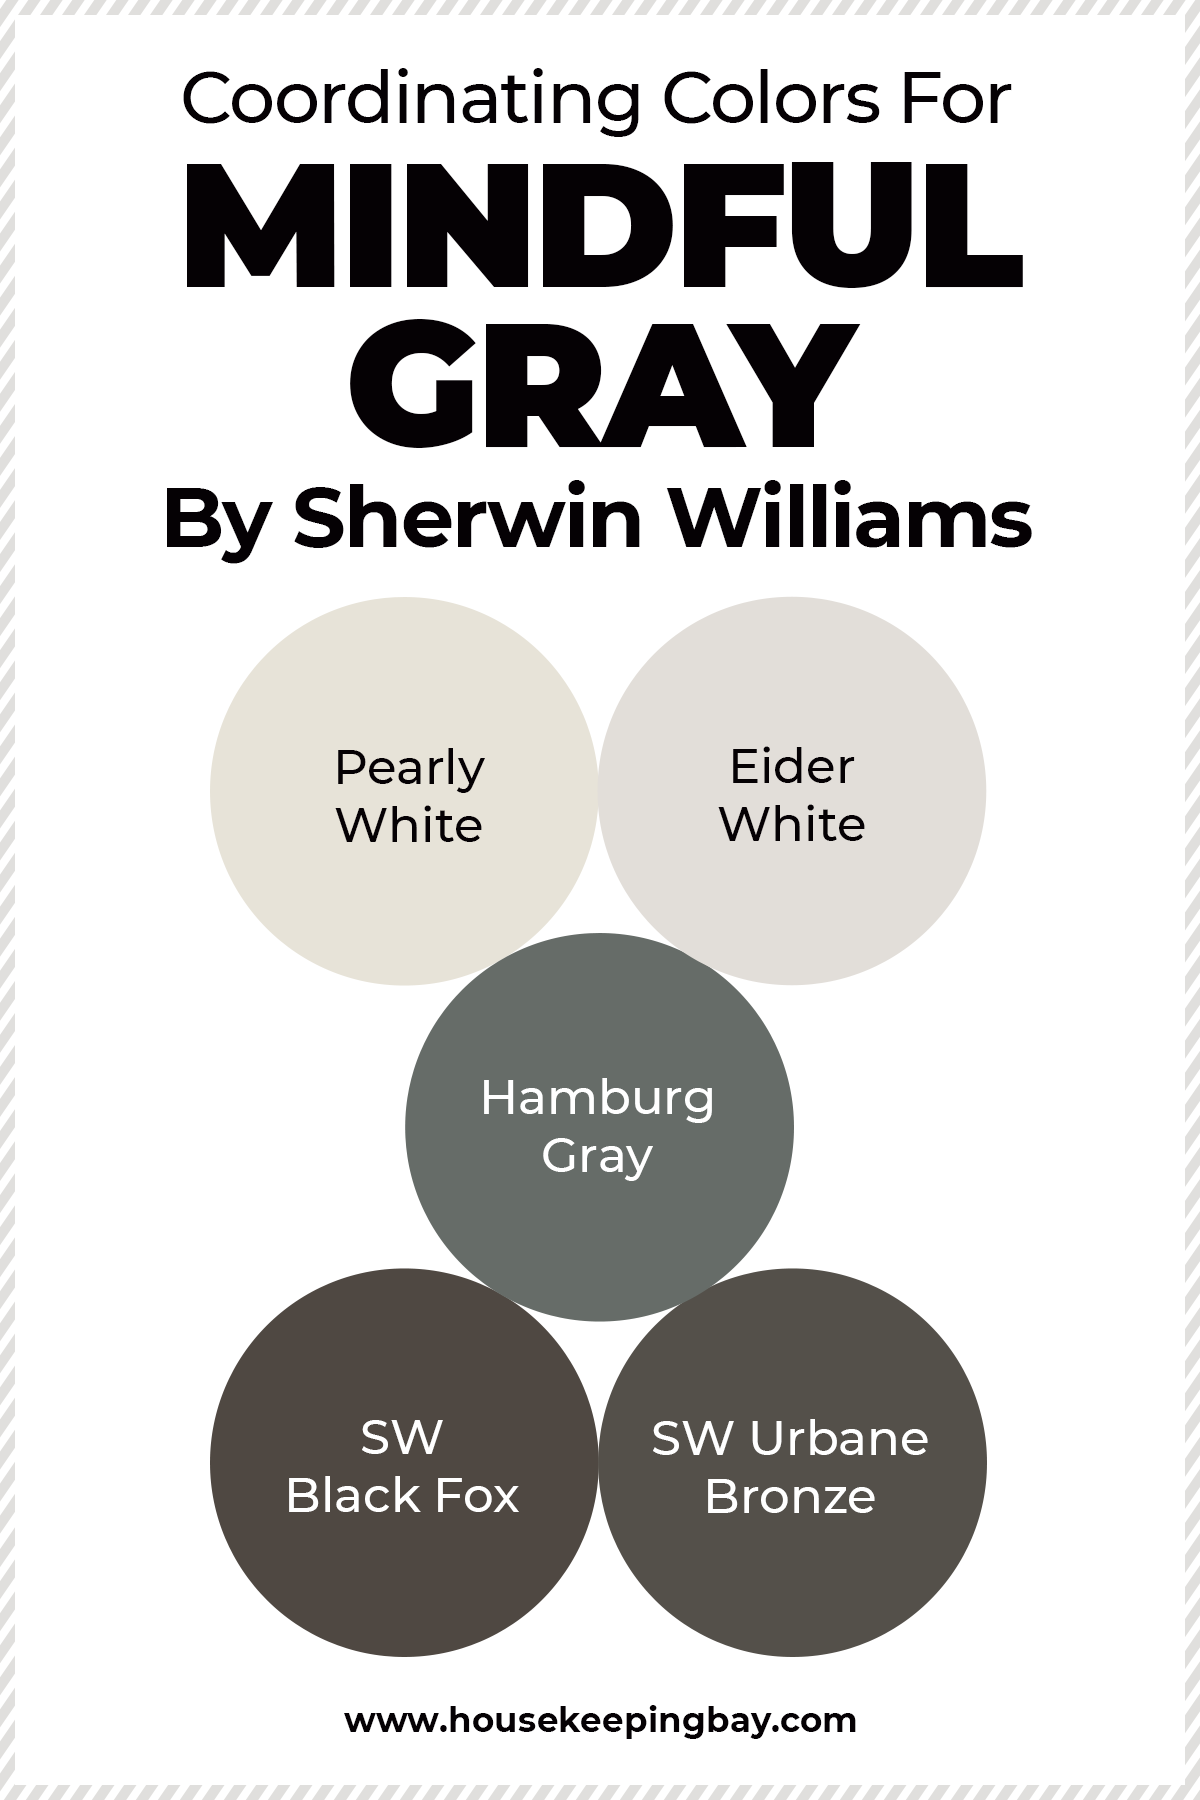 Mindful Gray By Sherwin Williams Coordinating Colors